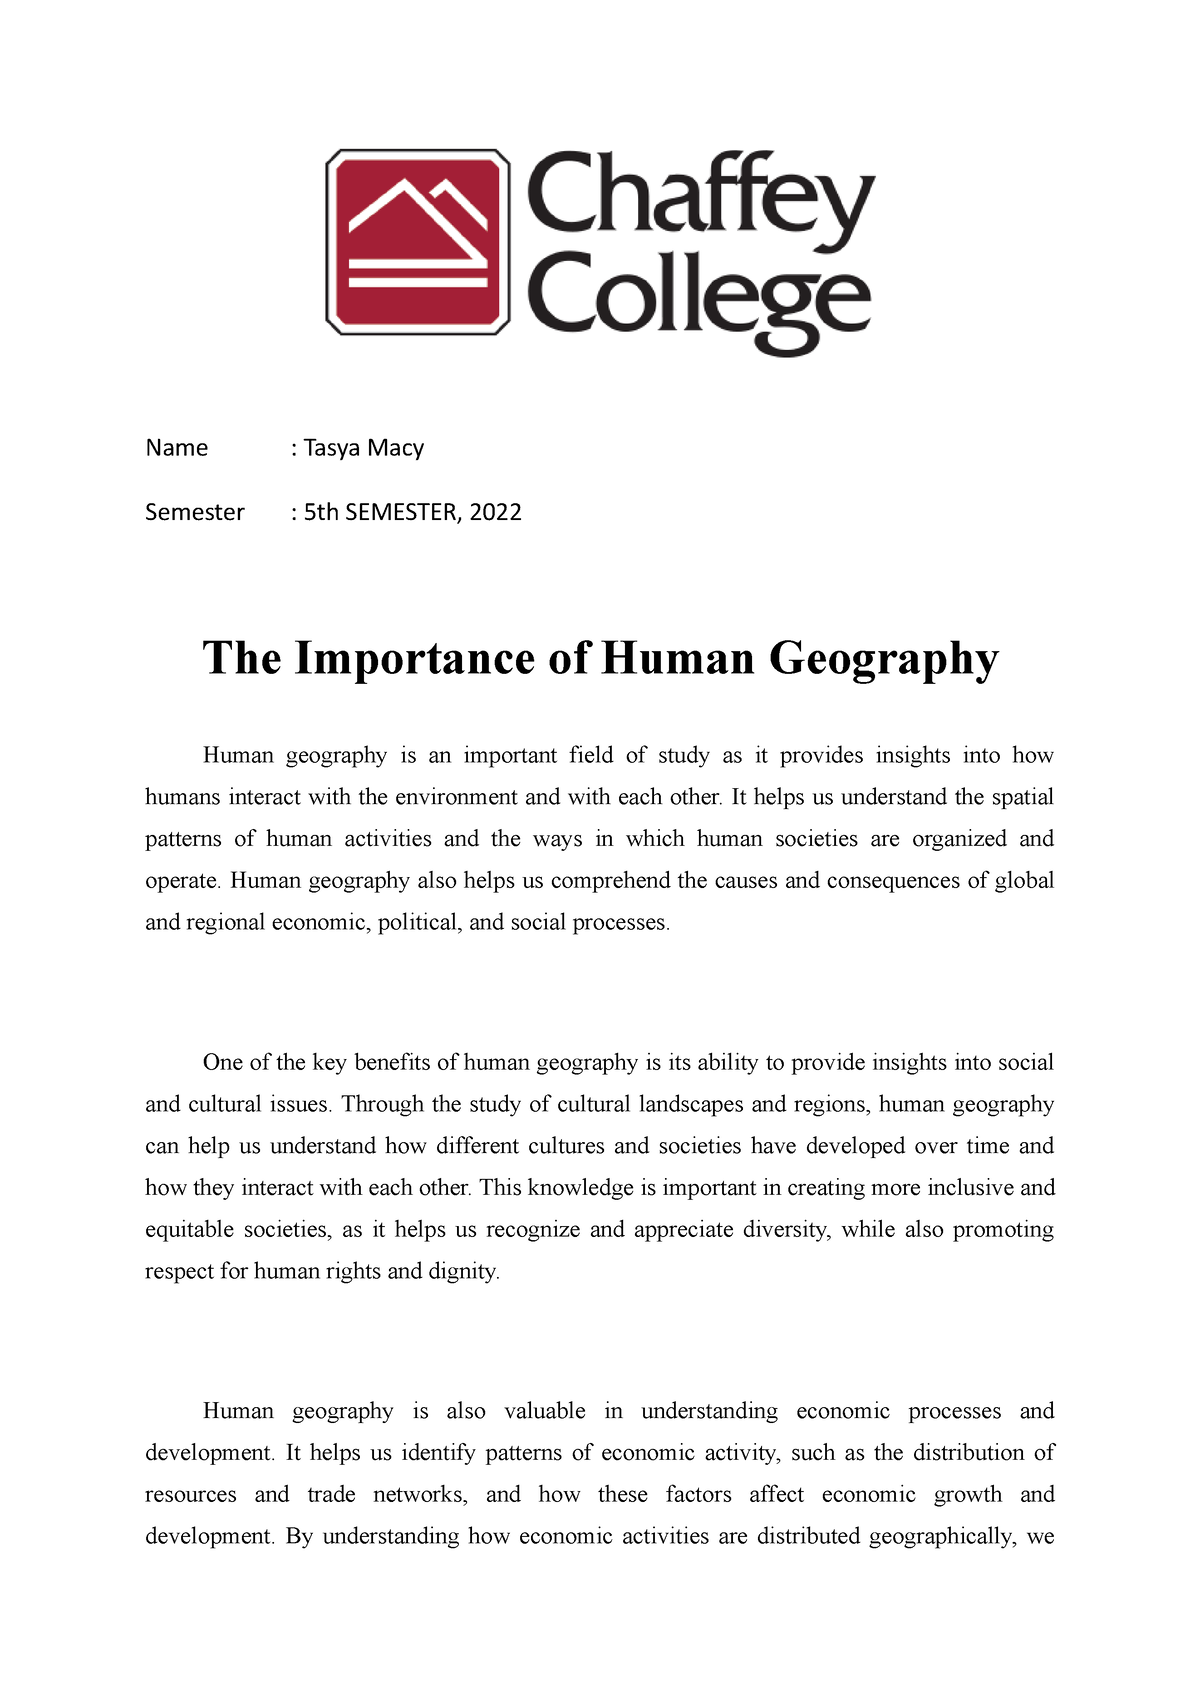 importance of human geography essay